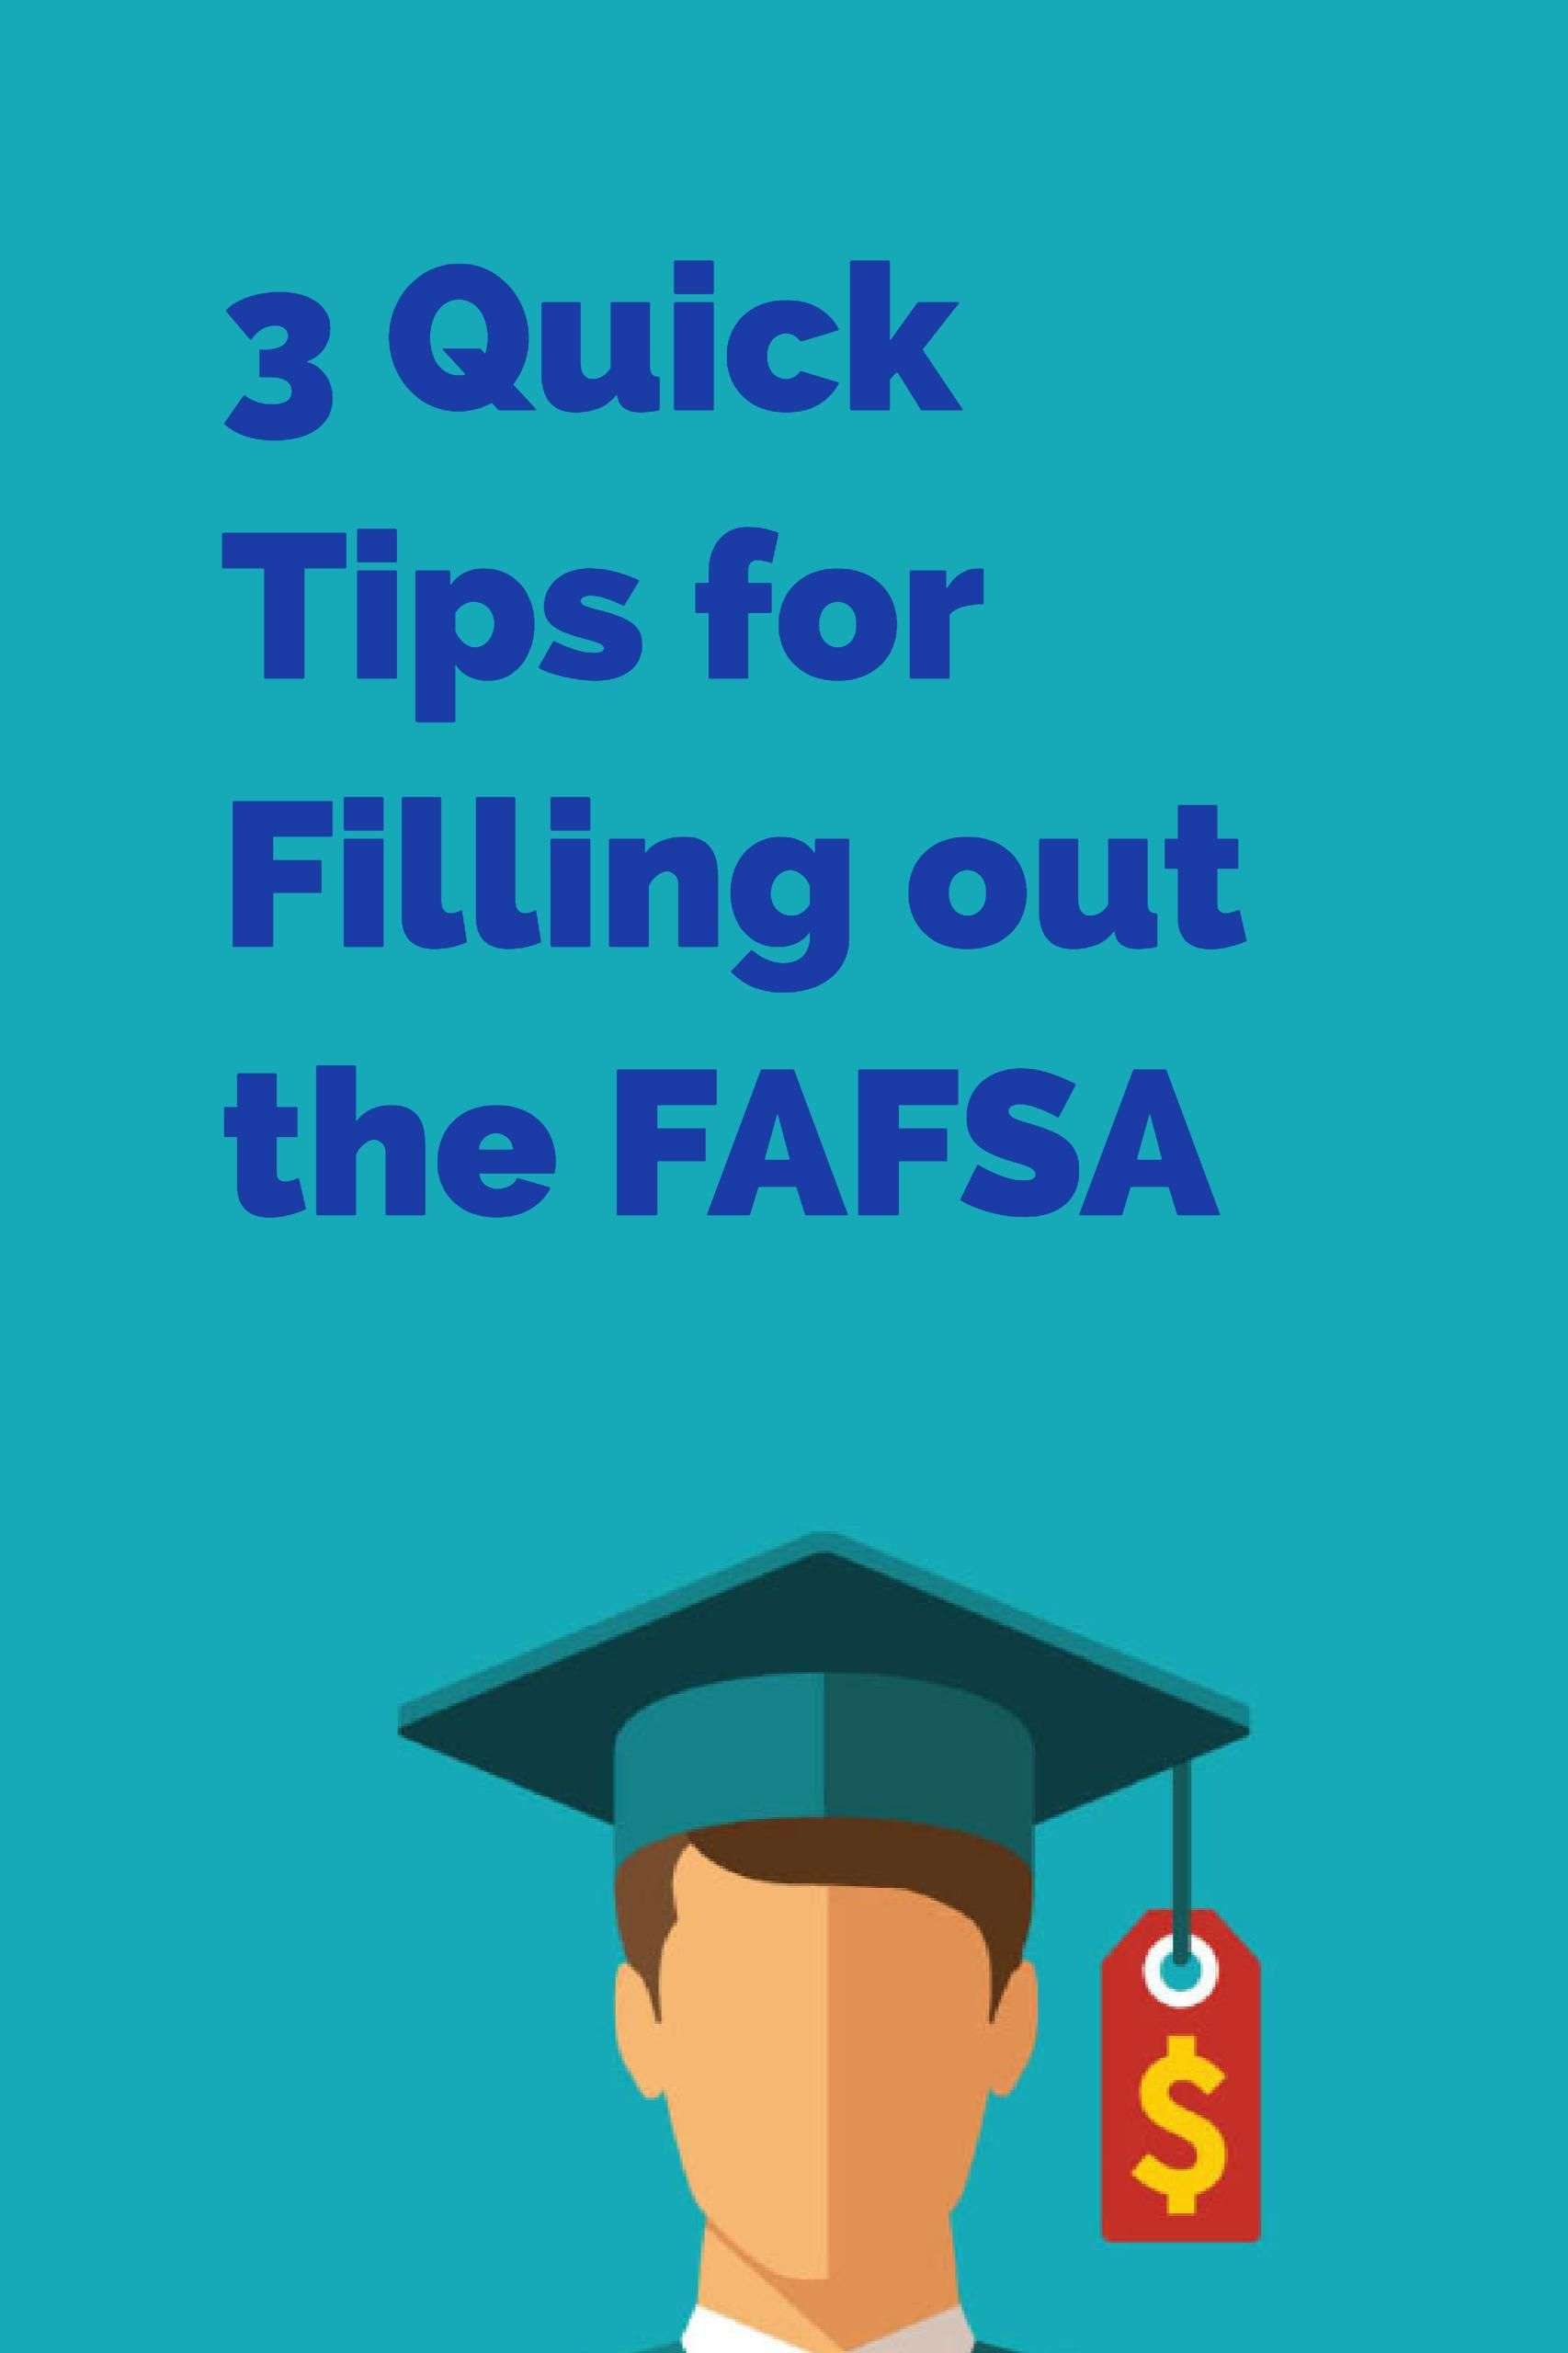 Do You Need Financial Aid? File Your FAFSA Form Early ...